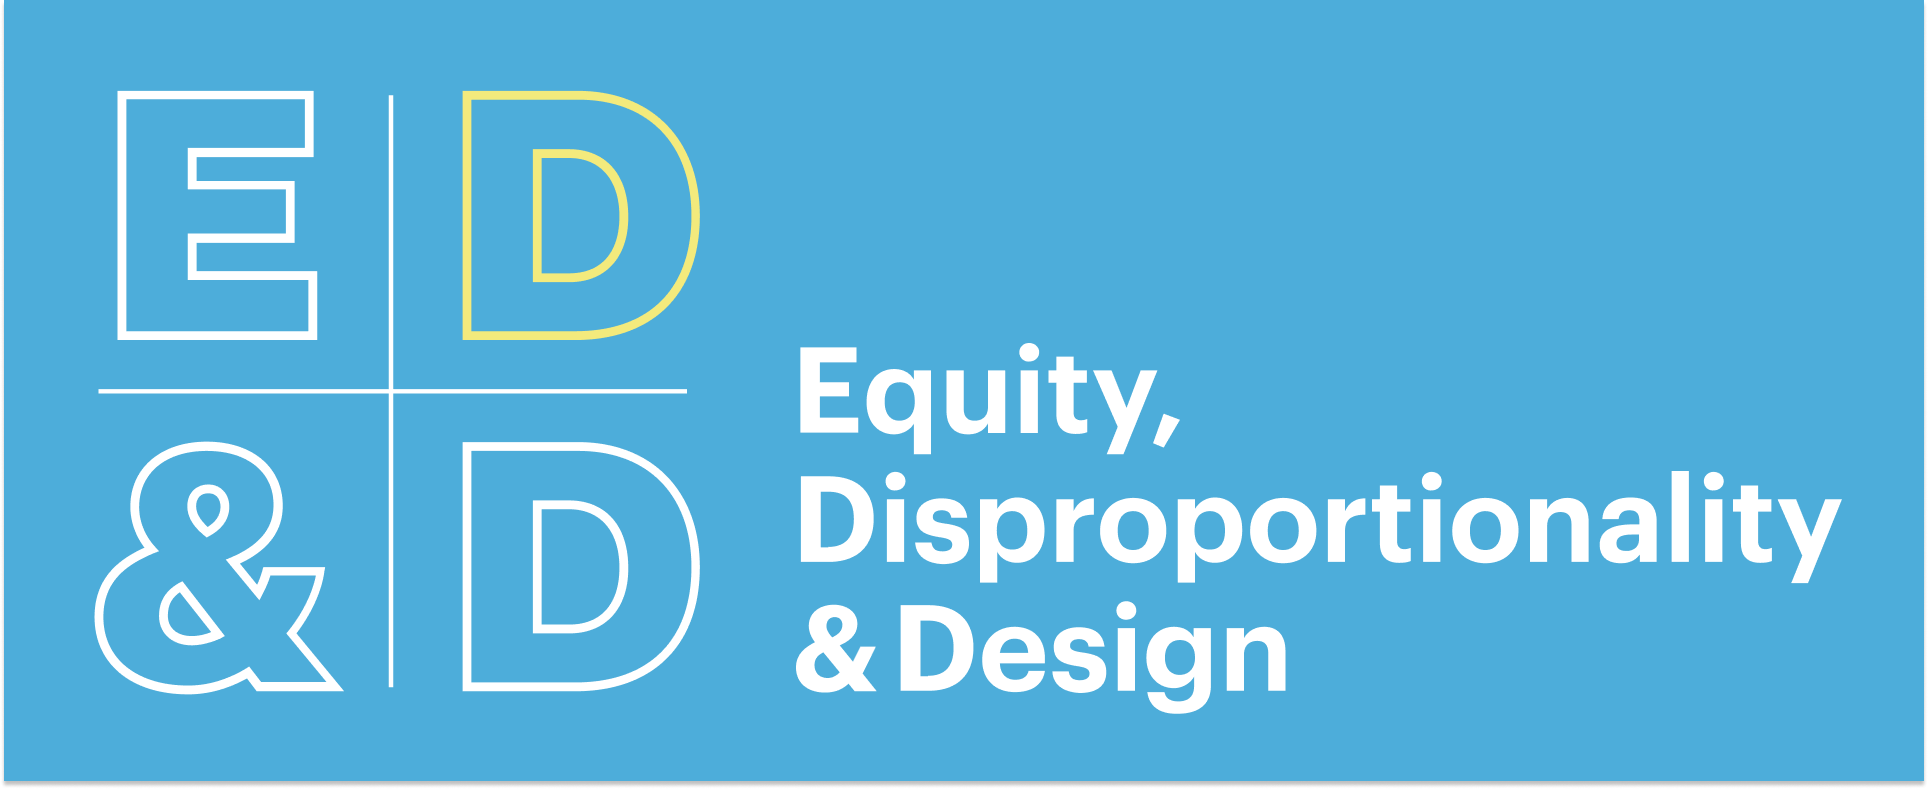 Equity, Disproportionality &amp; Design